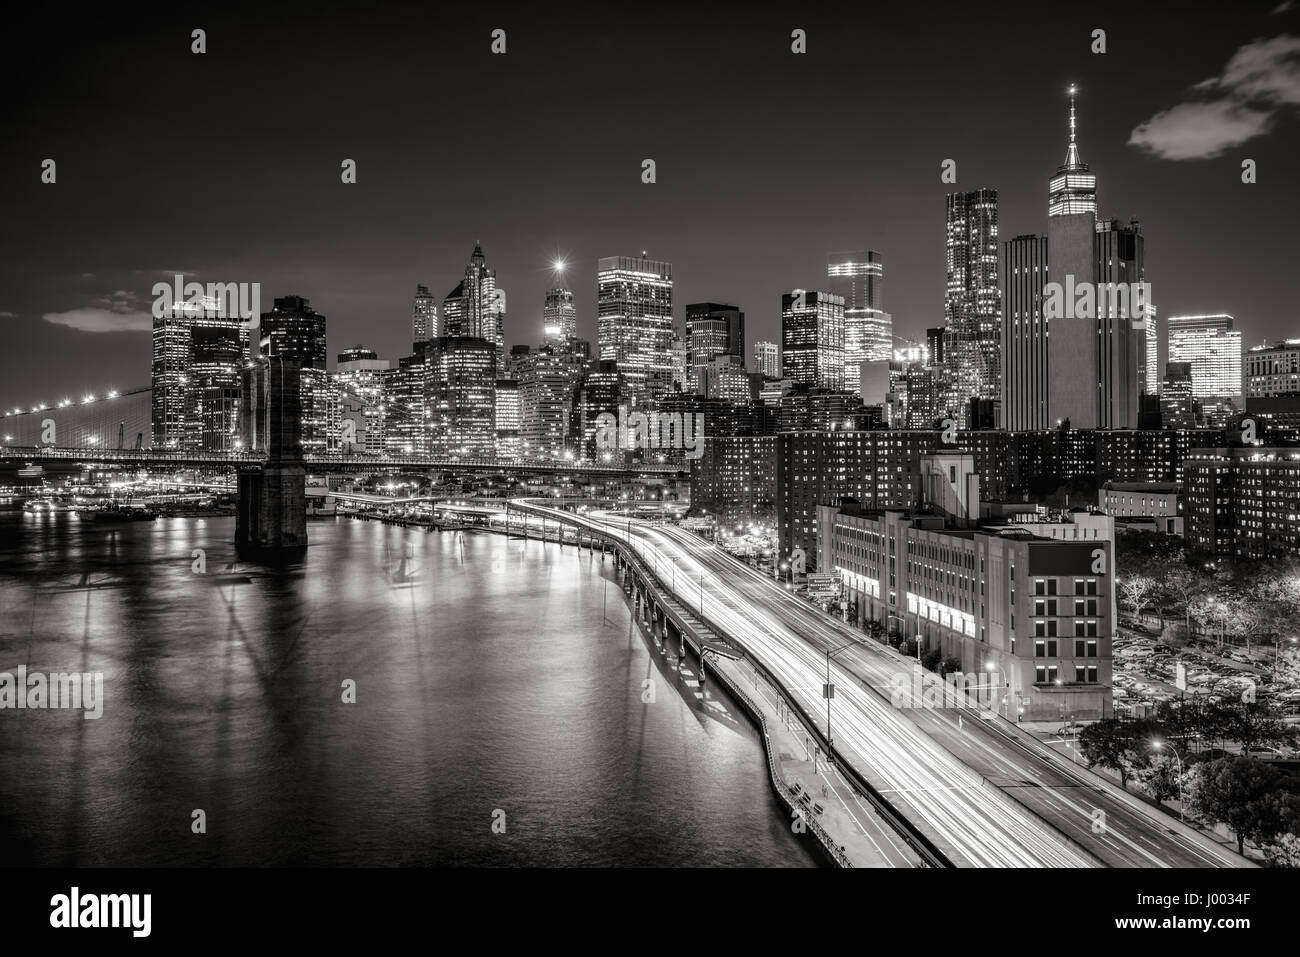 Elevated view of Lower Manhattan skyscrapers and Financial District. The Black & White night view includes the West tower of the Brooklyn Bridge, East Stock Photo